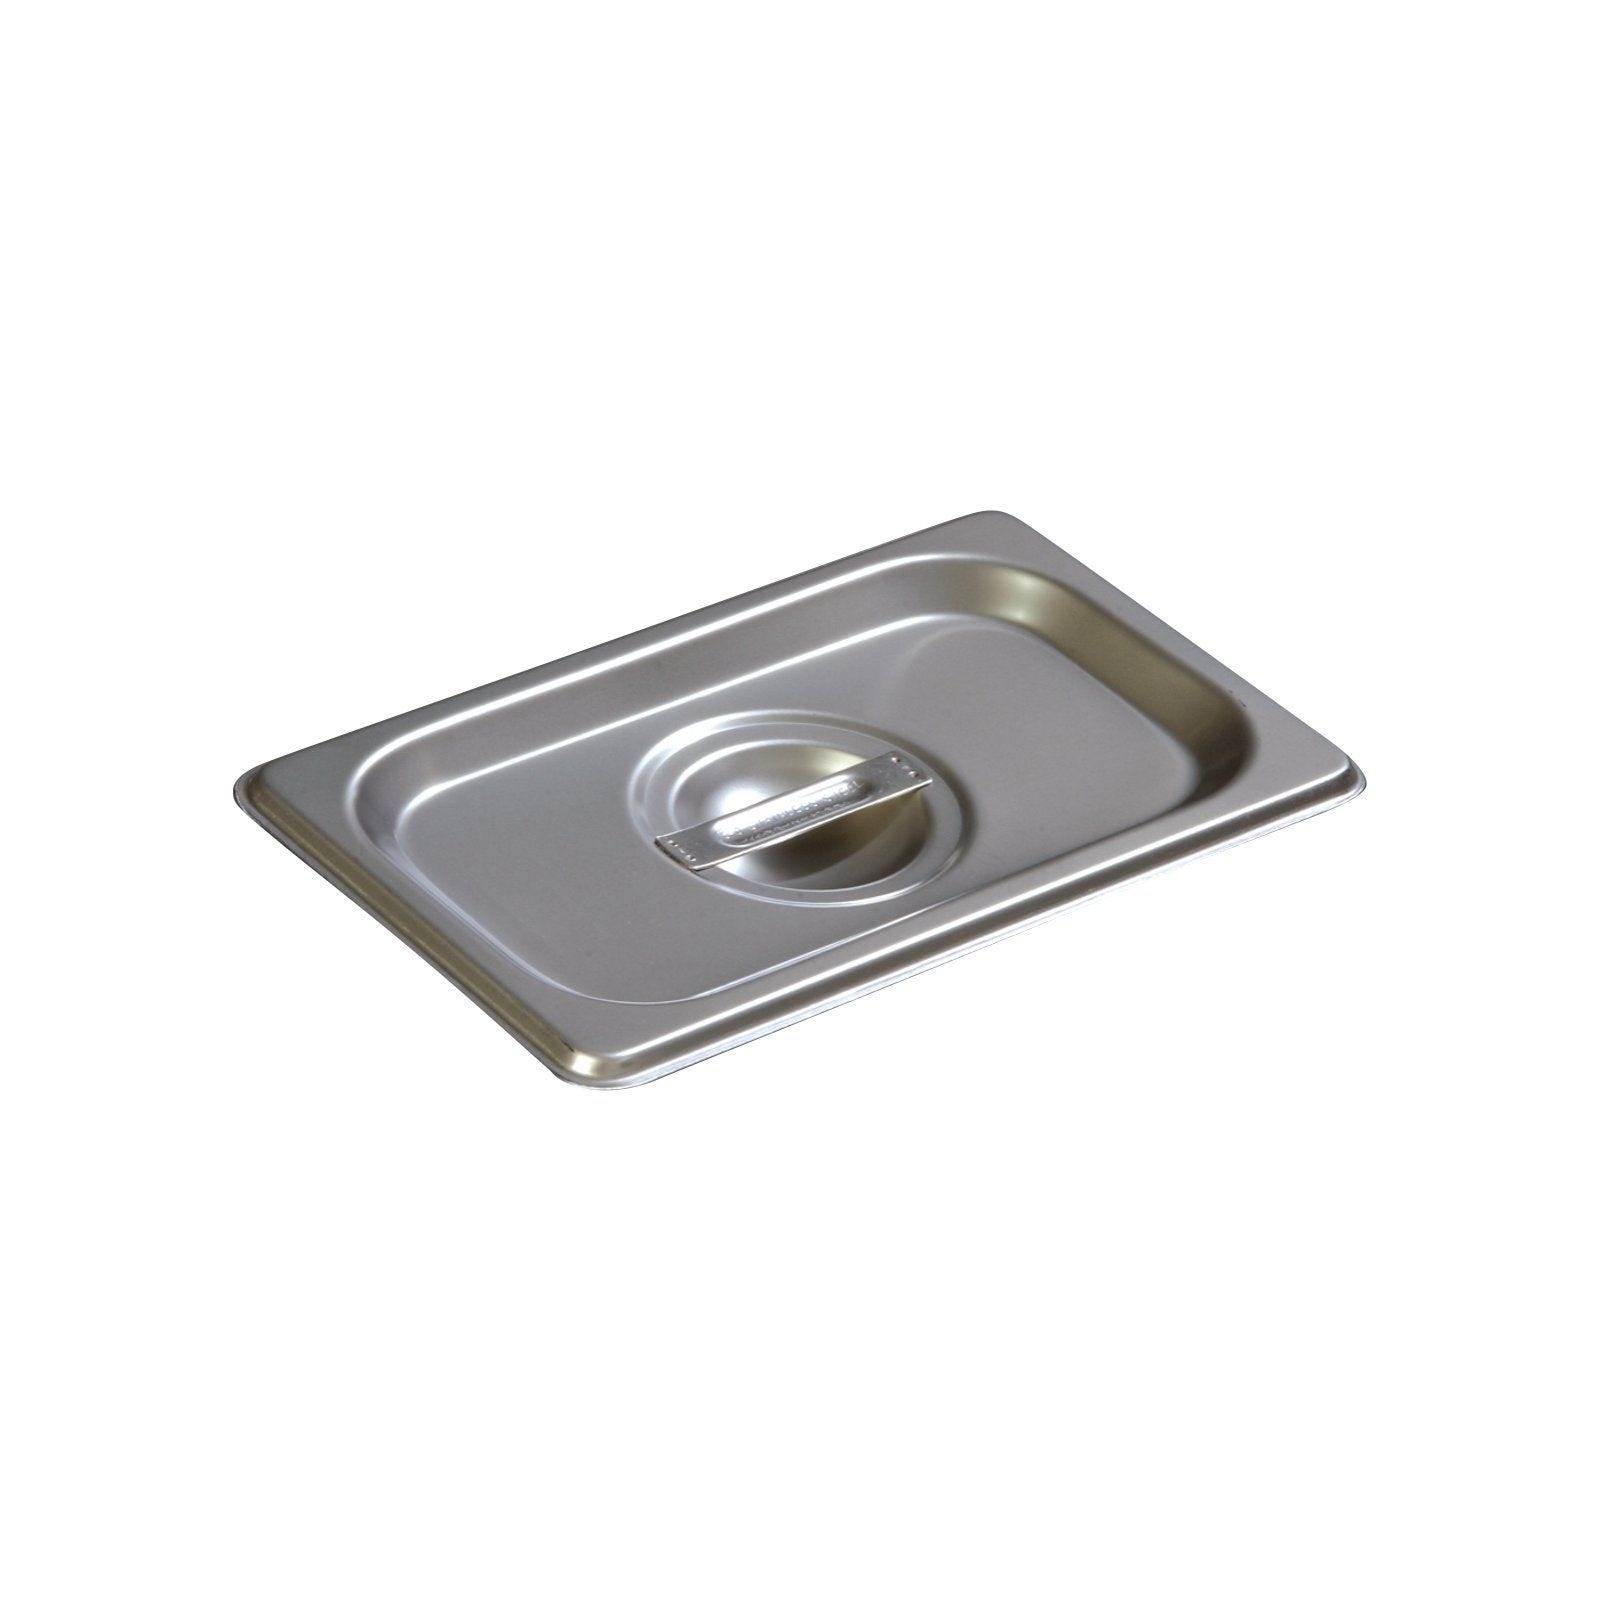 NINTH SIZE SLOTTED COVER FOR STEAM PANS by Thundergroup 